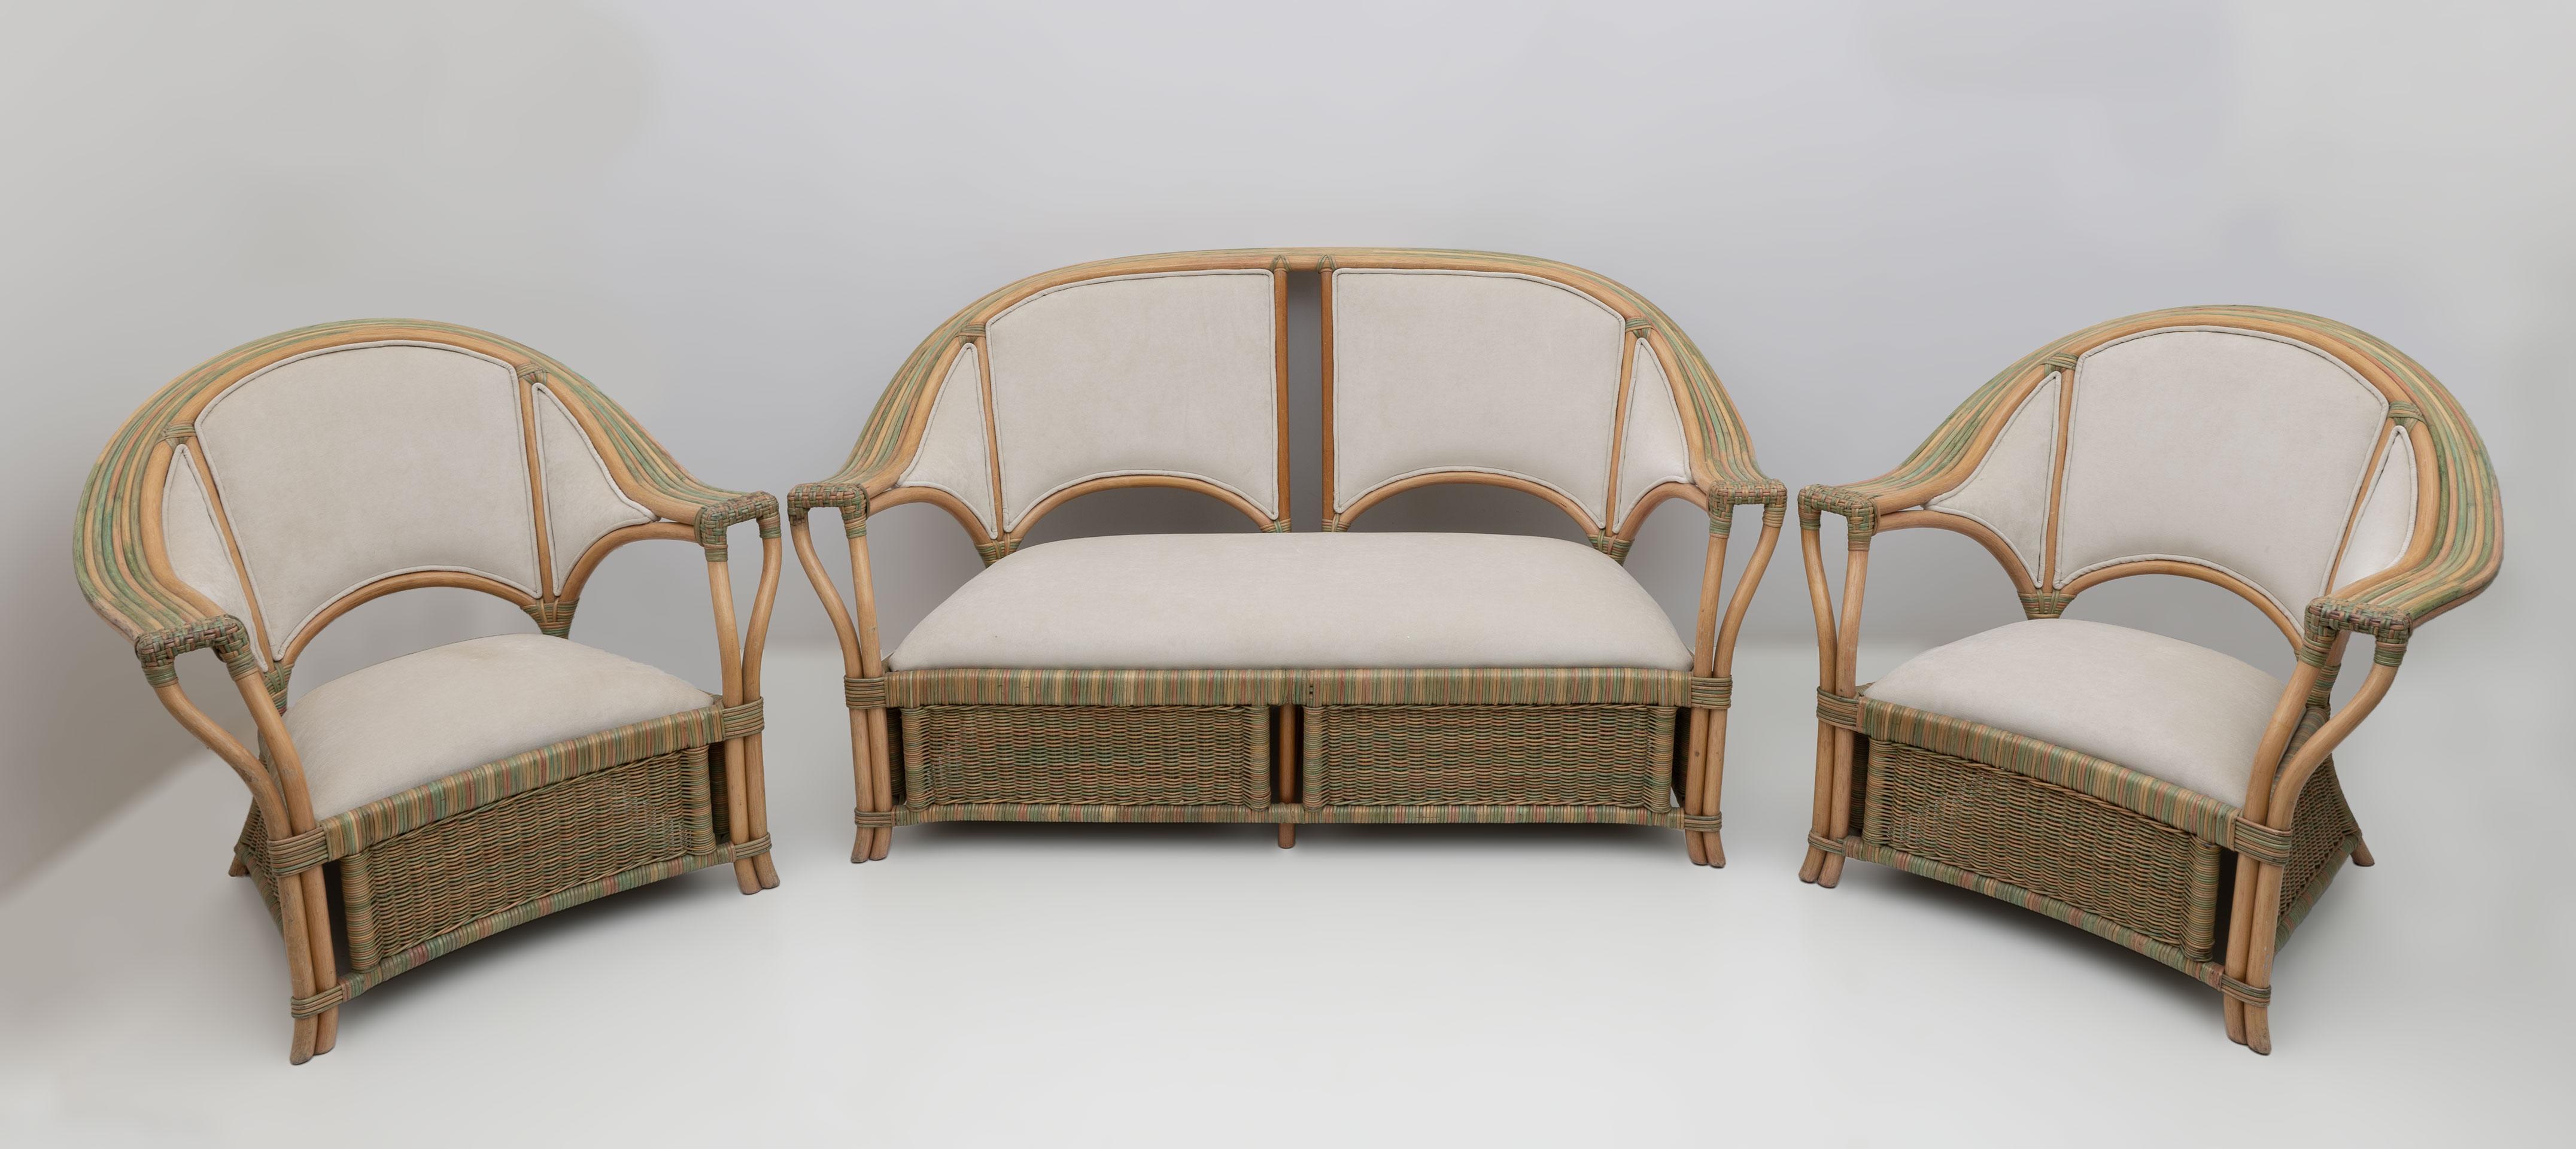 Pair of Mid-century Modern Italian Rattan and Wicker Armchairs, 1970s For Sale 7